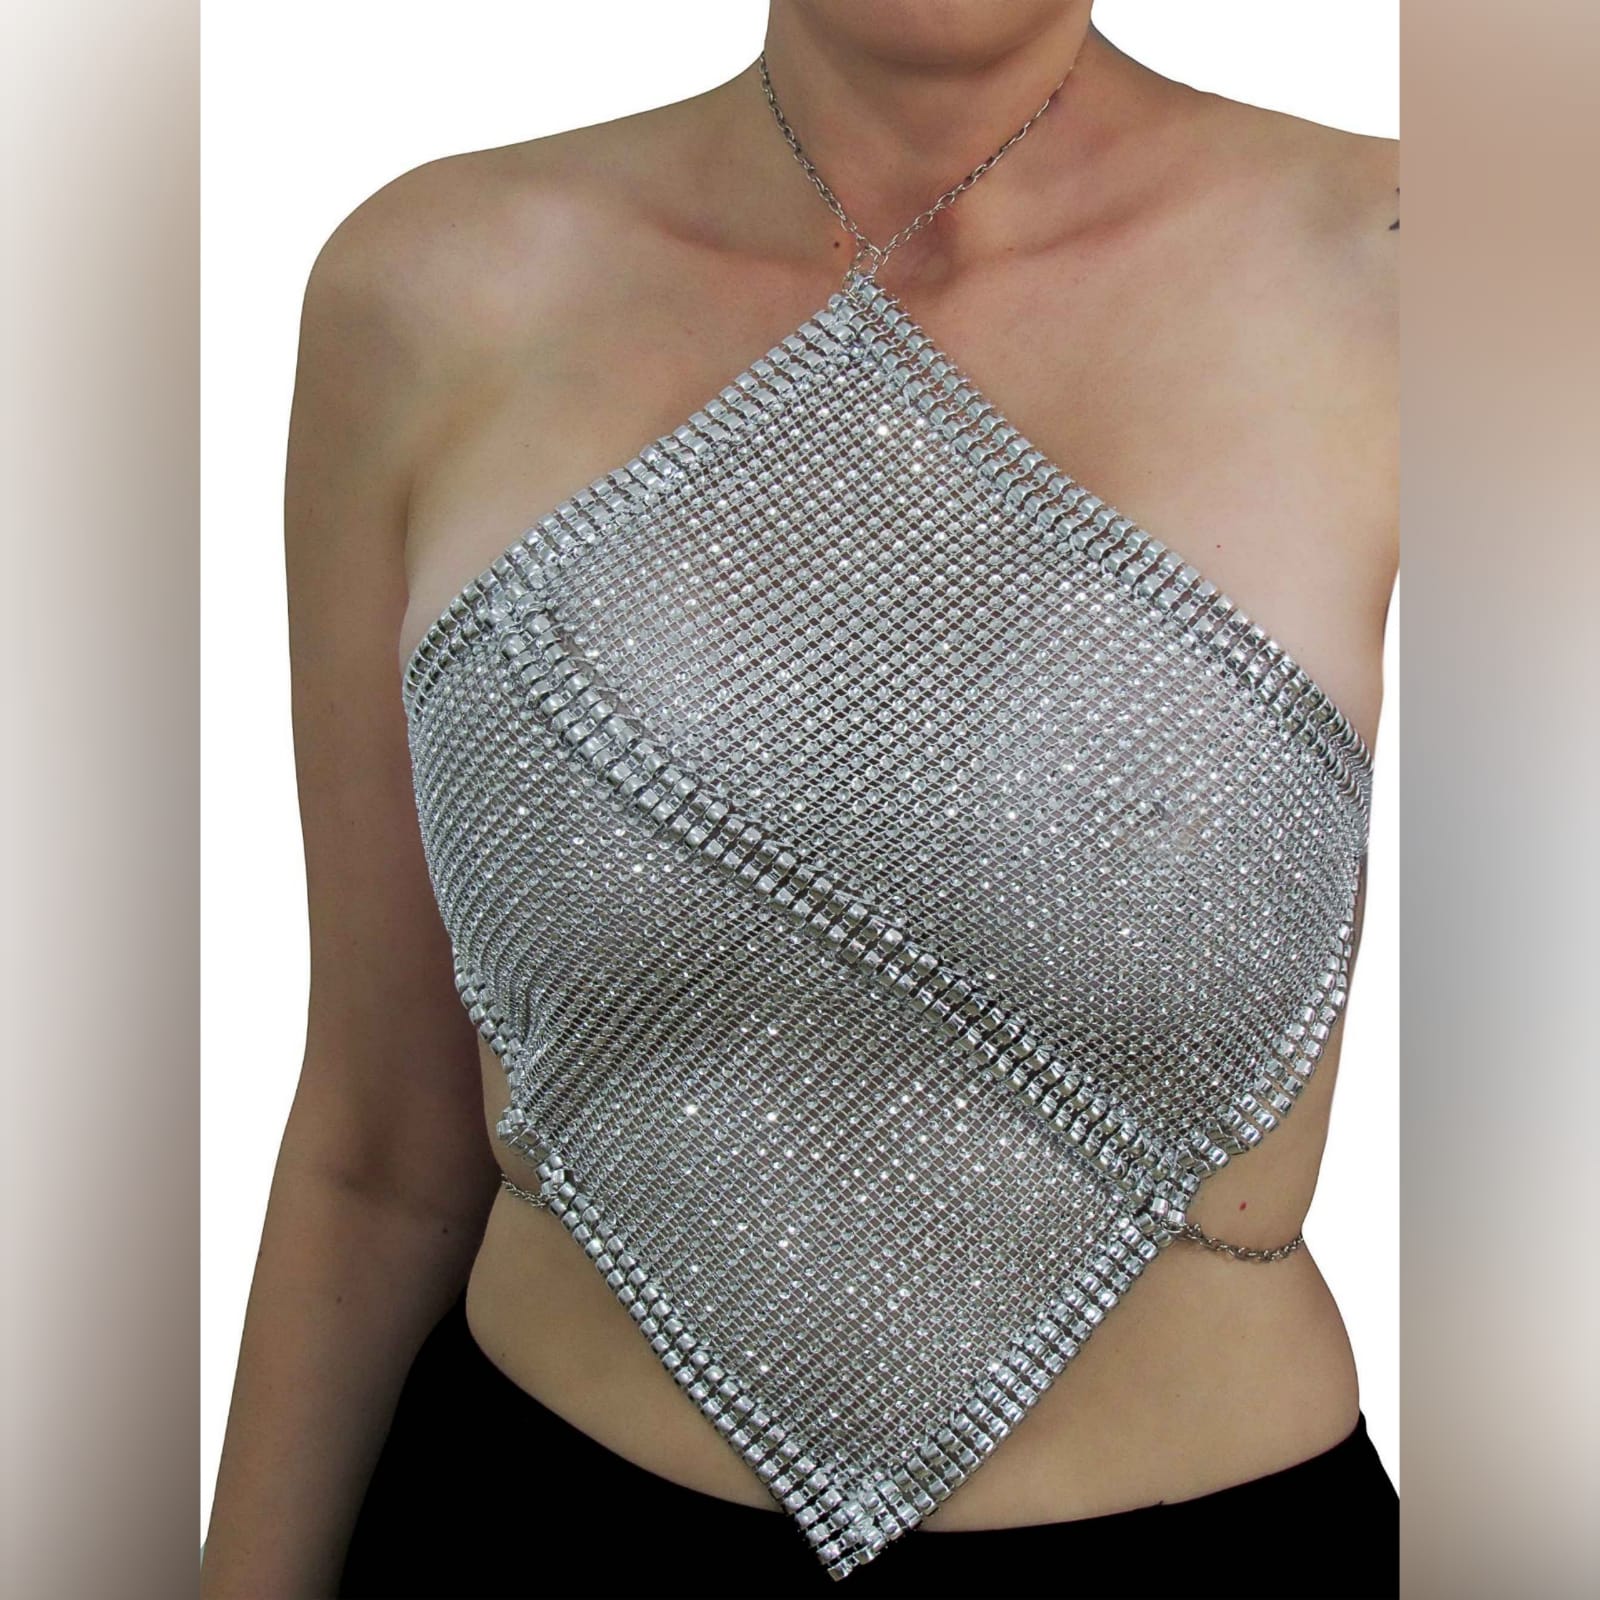 Diamond shape shiny silver crop top 3 diamond shape shiny silver crop top. Sexy top is great for dancing or a fun night out. Ties up on the neck and back with chain, which can be used to adjust the fit a sheer shiny top is great to add glamour and sexy to your look.